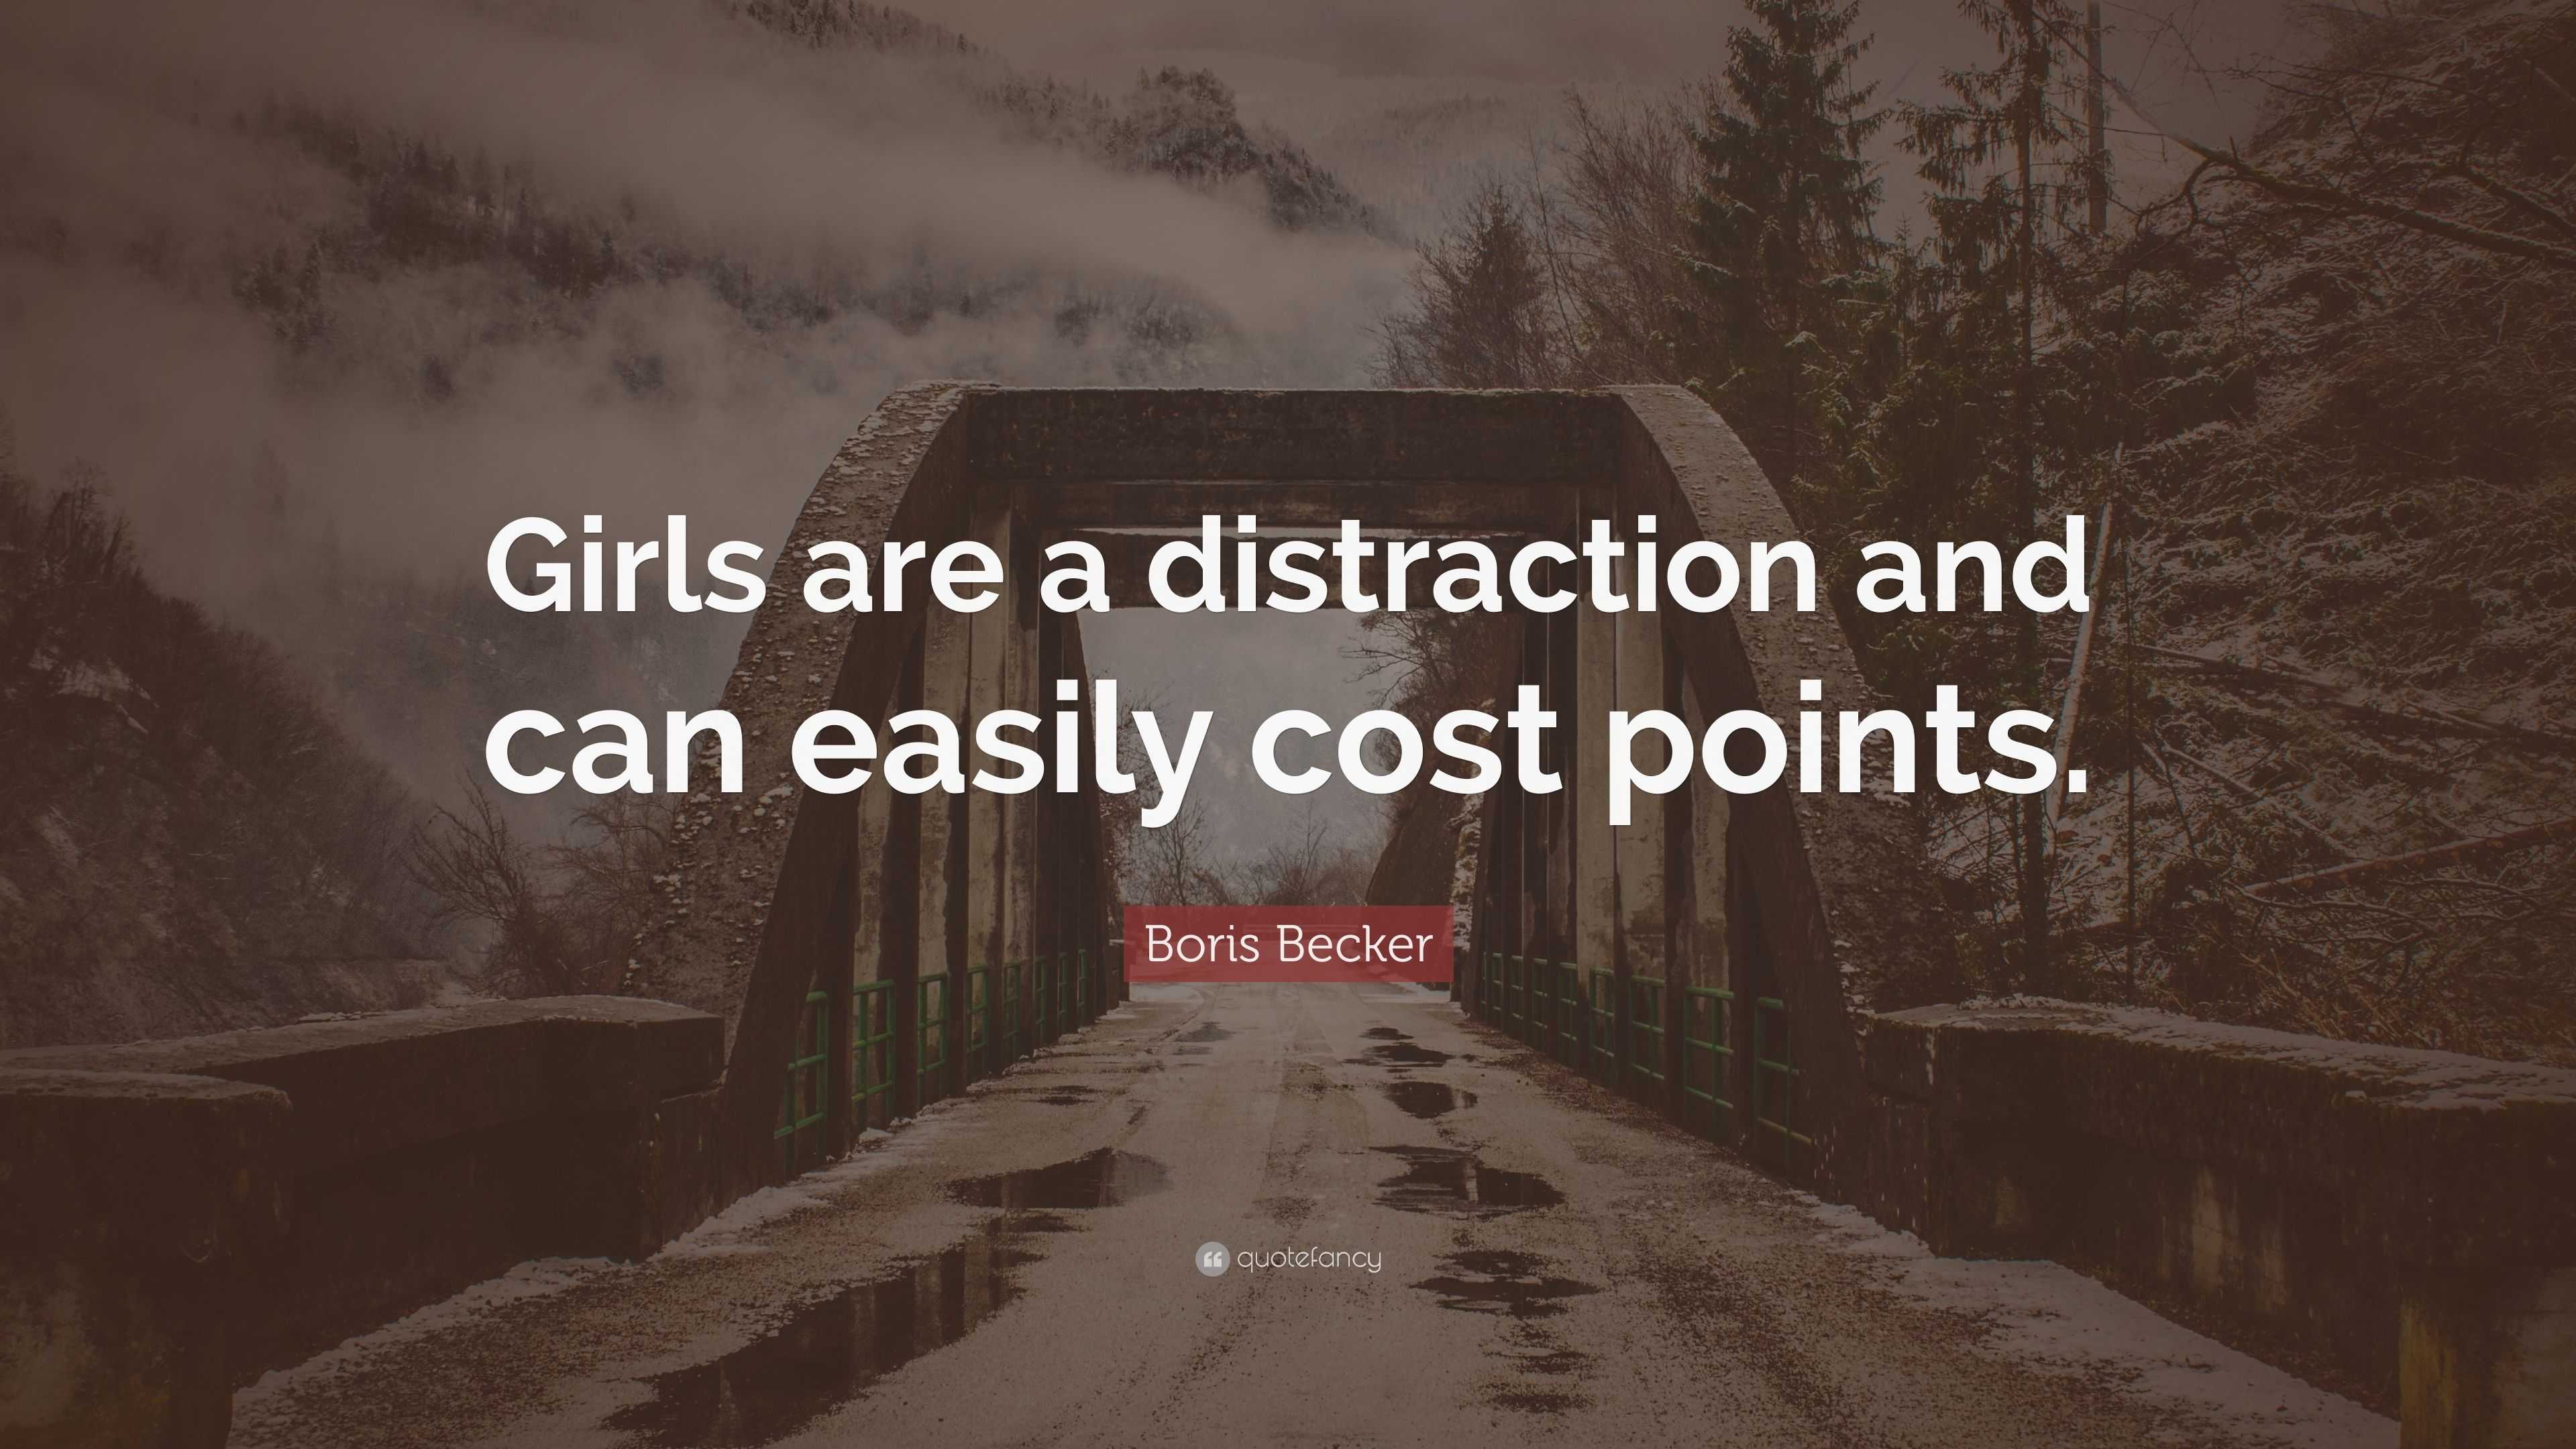 Boris Becker quote: Girls are a distraction and can easily cost